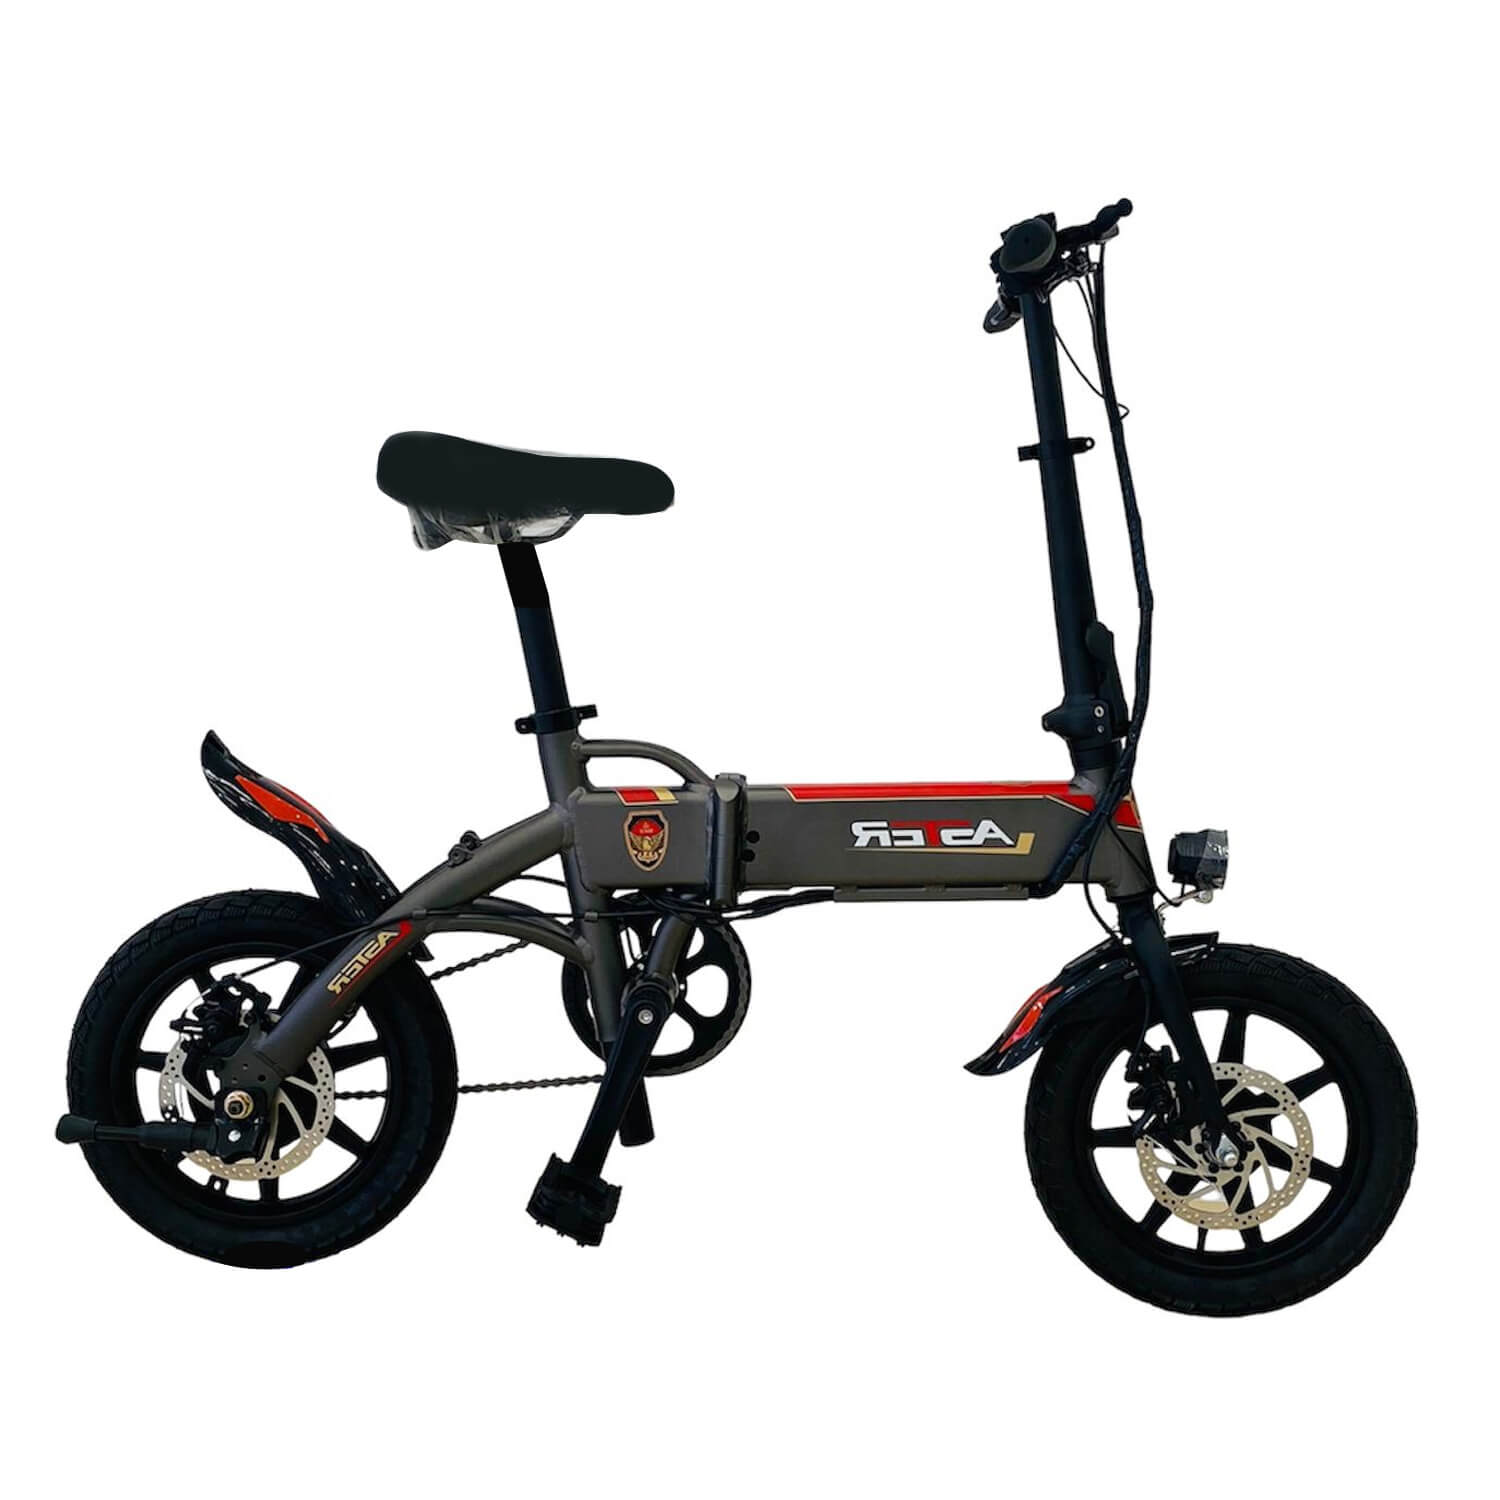 Foldable Electric Bike 36 v with pedal assist